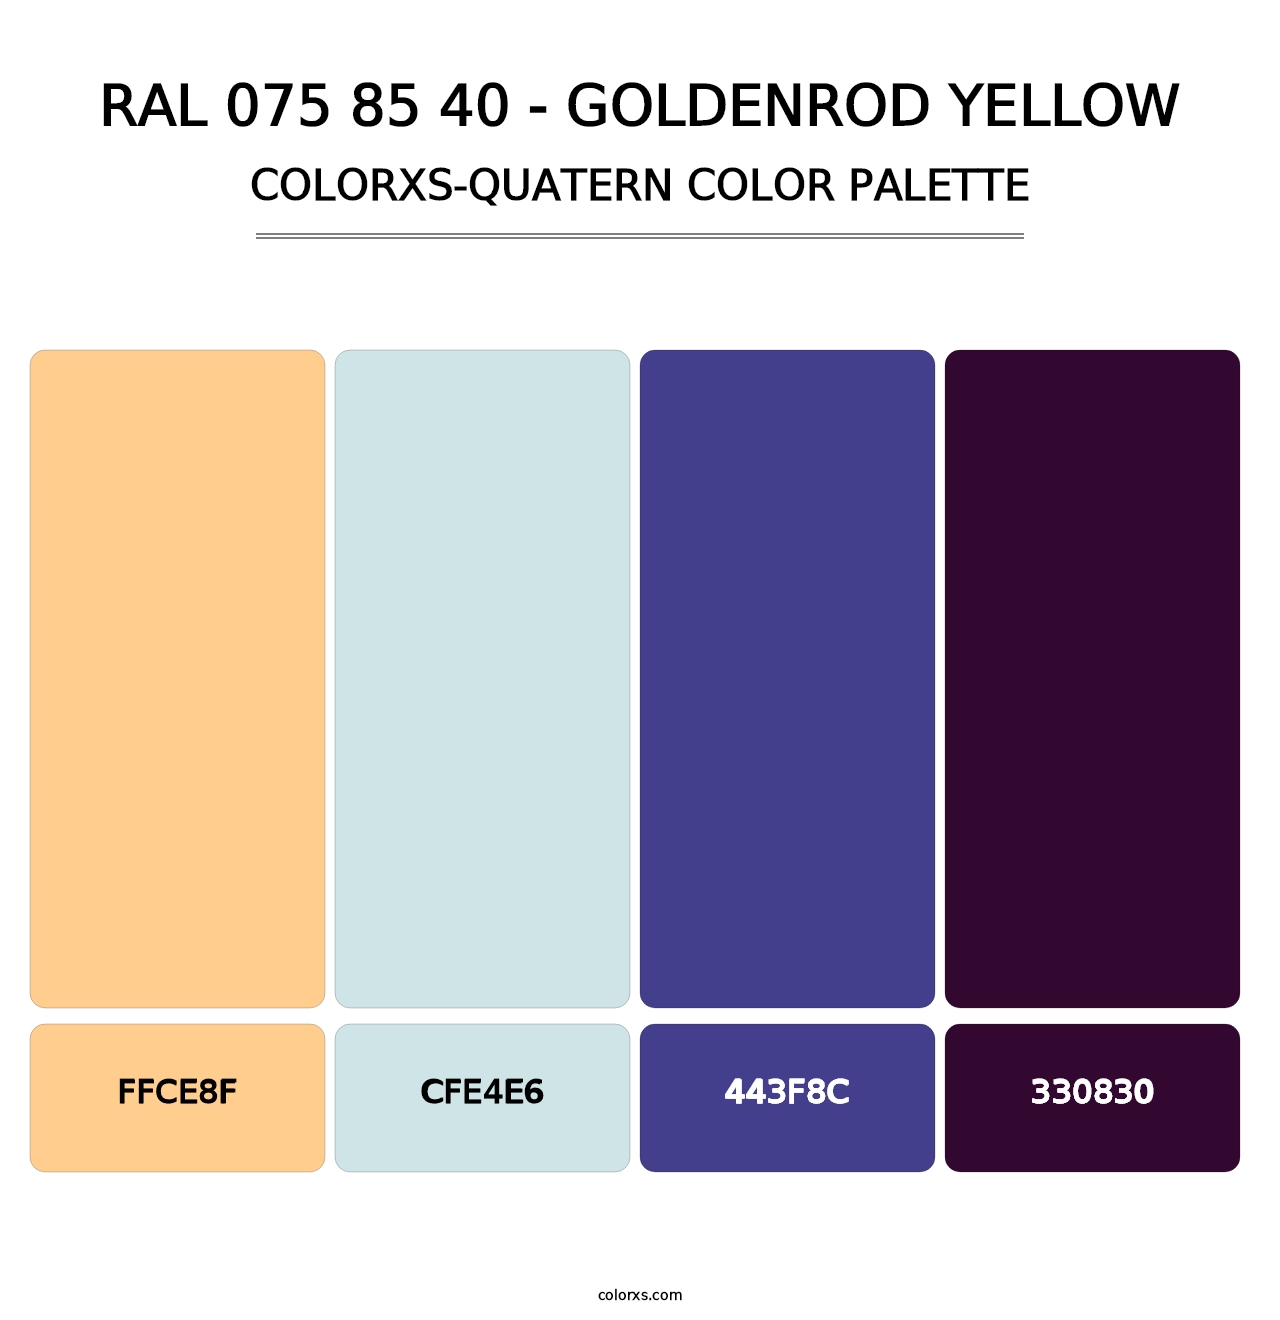 RAL 075 85 40 - Goldenrod Yellow - Colorxs Quatern Palette